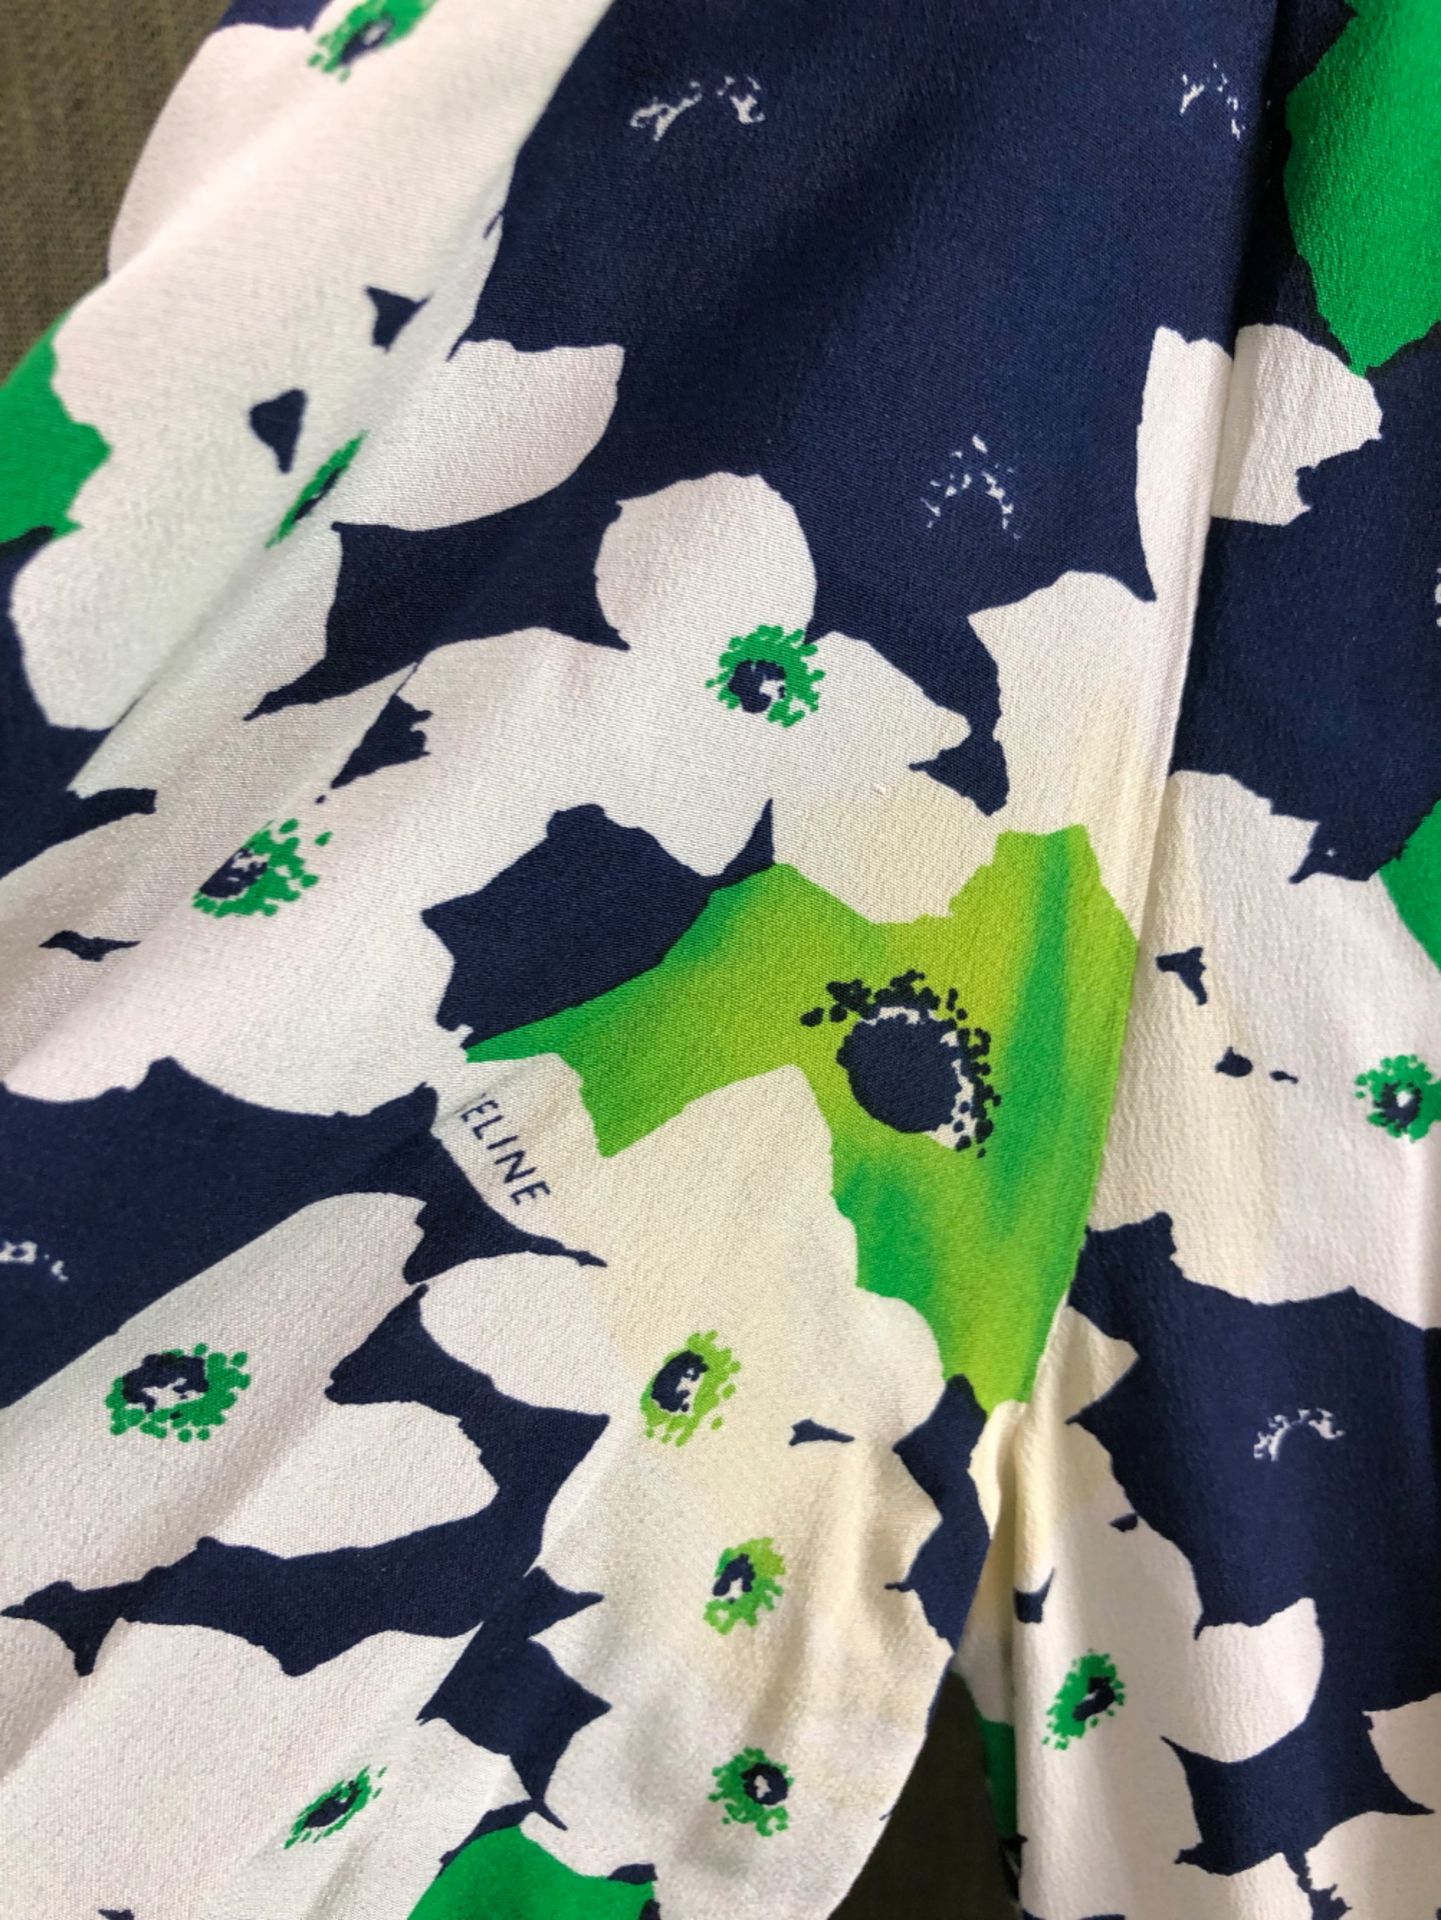 A CELINE PARIS BLUE, WHITE AND GREEN FLORAL PRINT DRESS SIZE 40, AND A FURTHER SCOOP BACK DRESS OF - Image 12 of 12